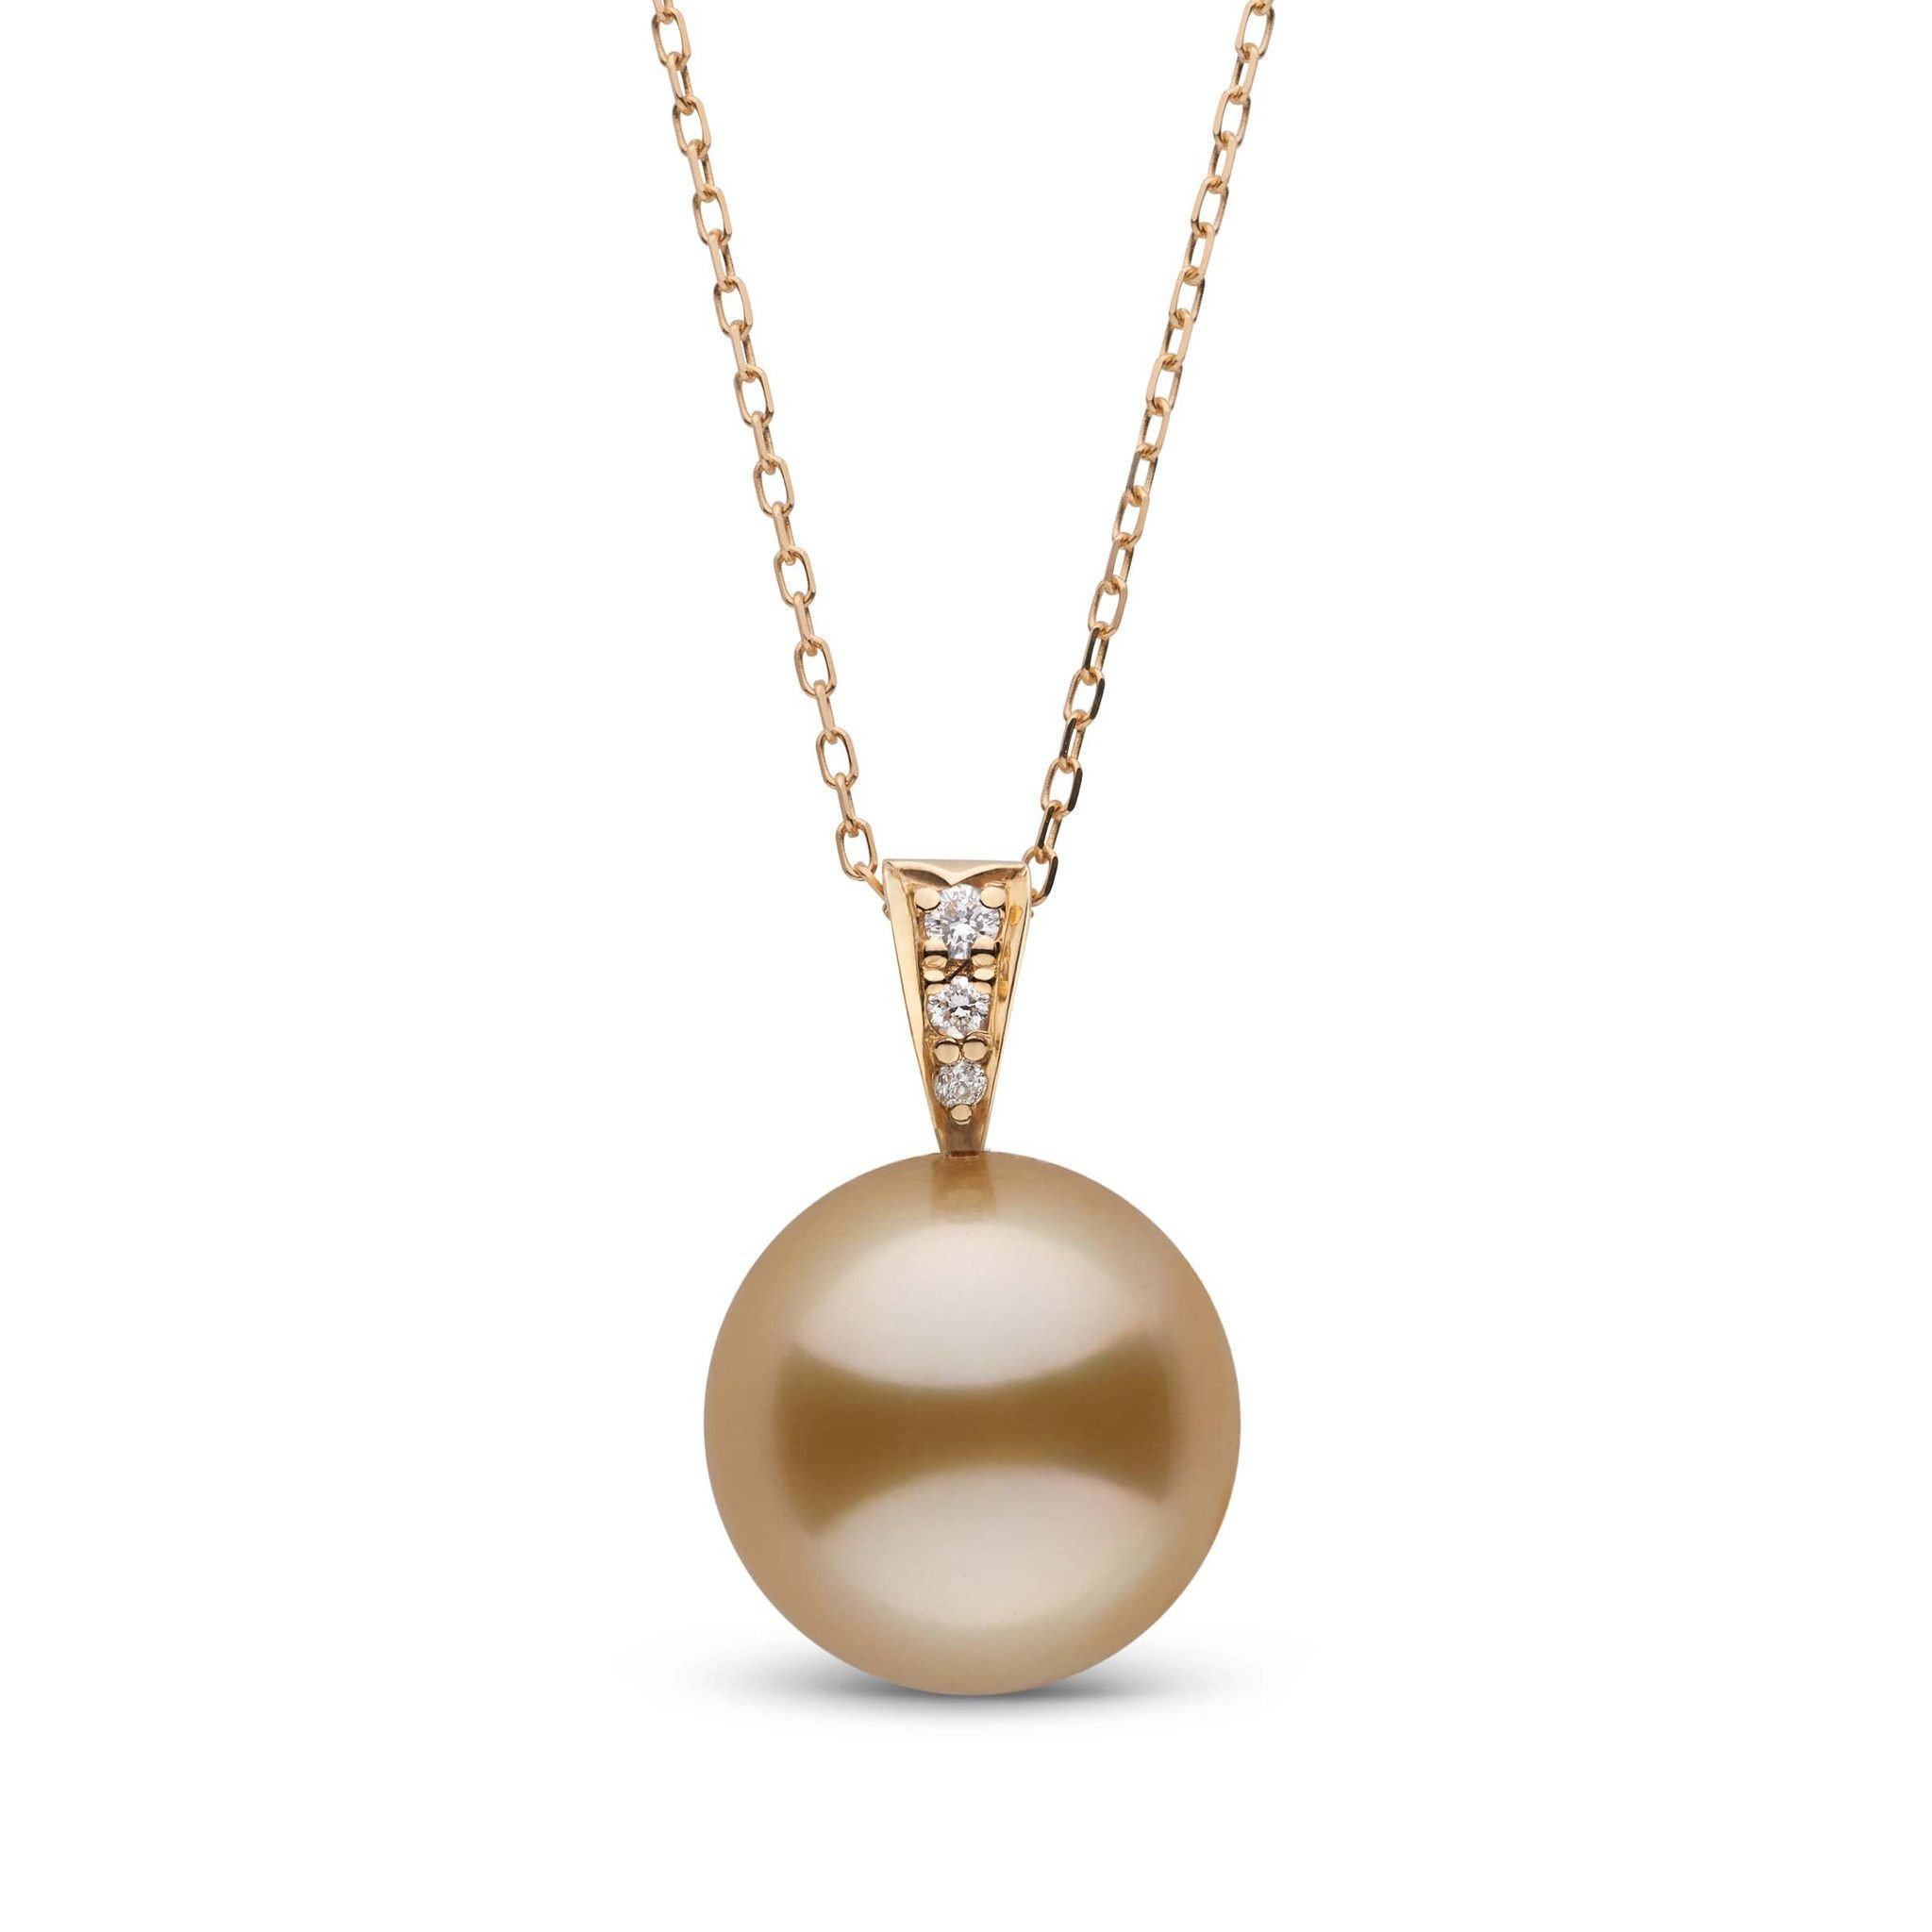 Desire Collection Golden 12.0-13.0 mm South Sea Pearl and Diamond Pendant